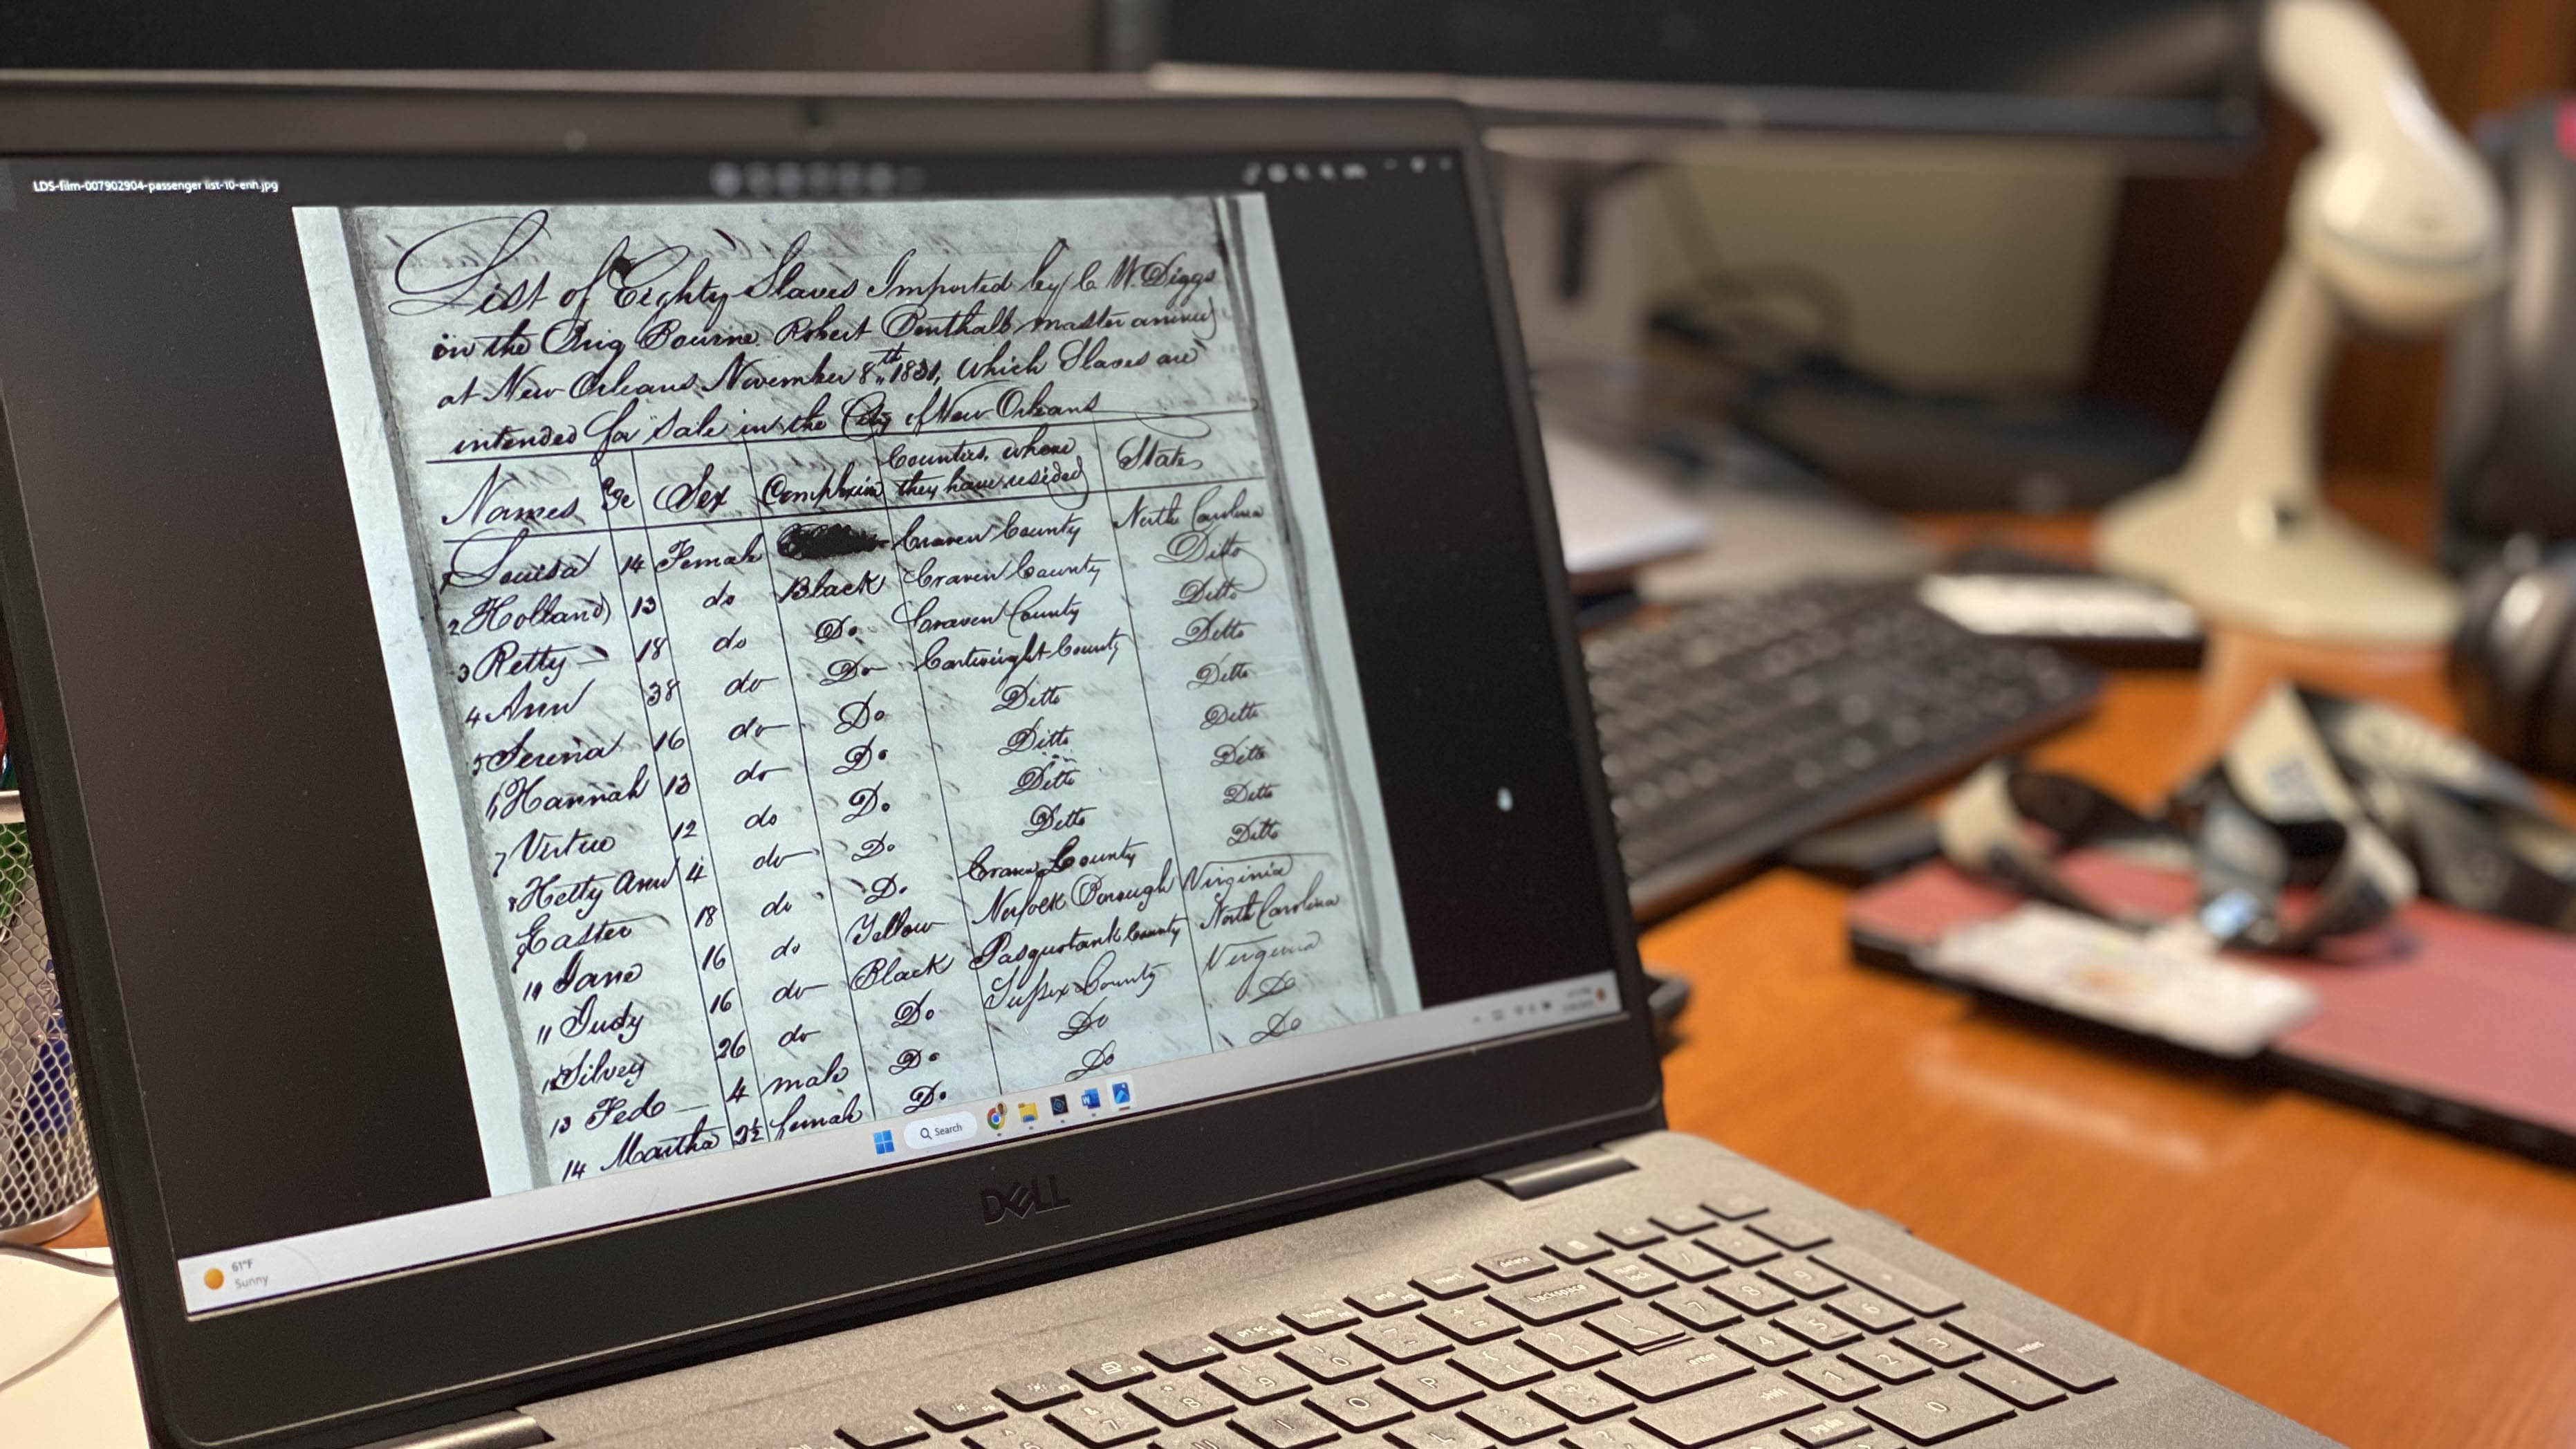 The laptop of librarian Troy Valos displays one of the ship manifests transcribed for the Sold Down River project. (Image: Katherine Hafner)